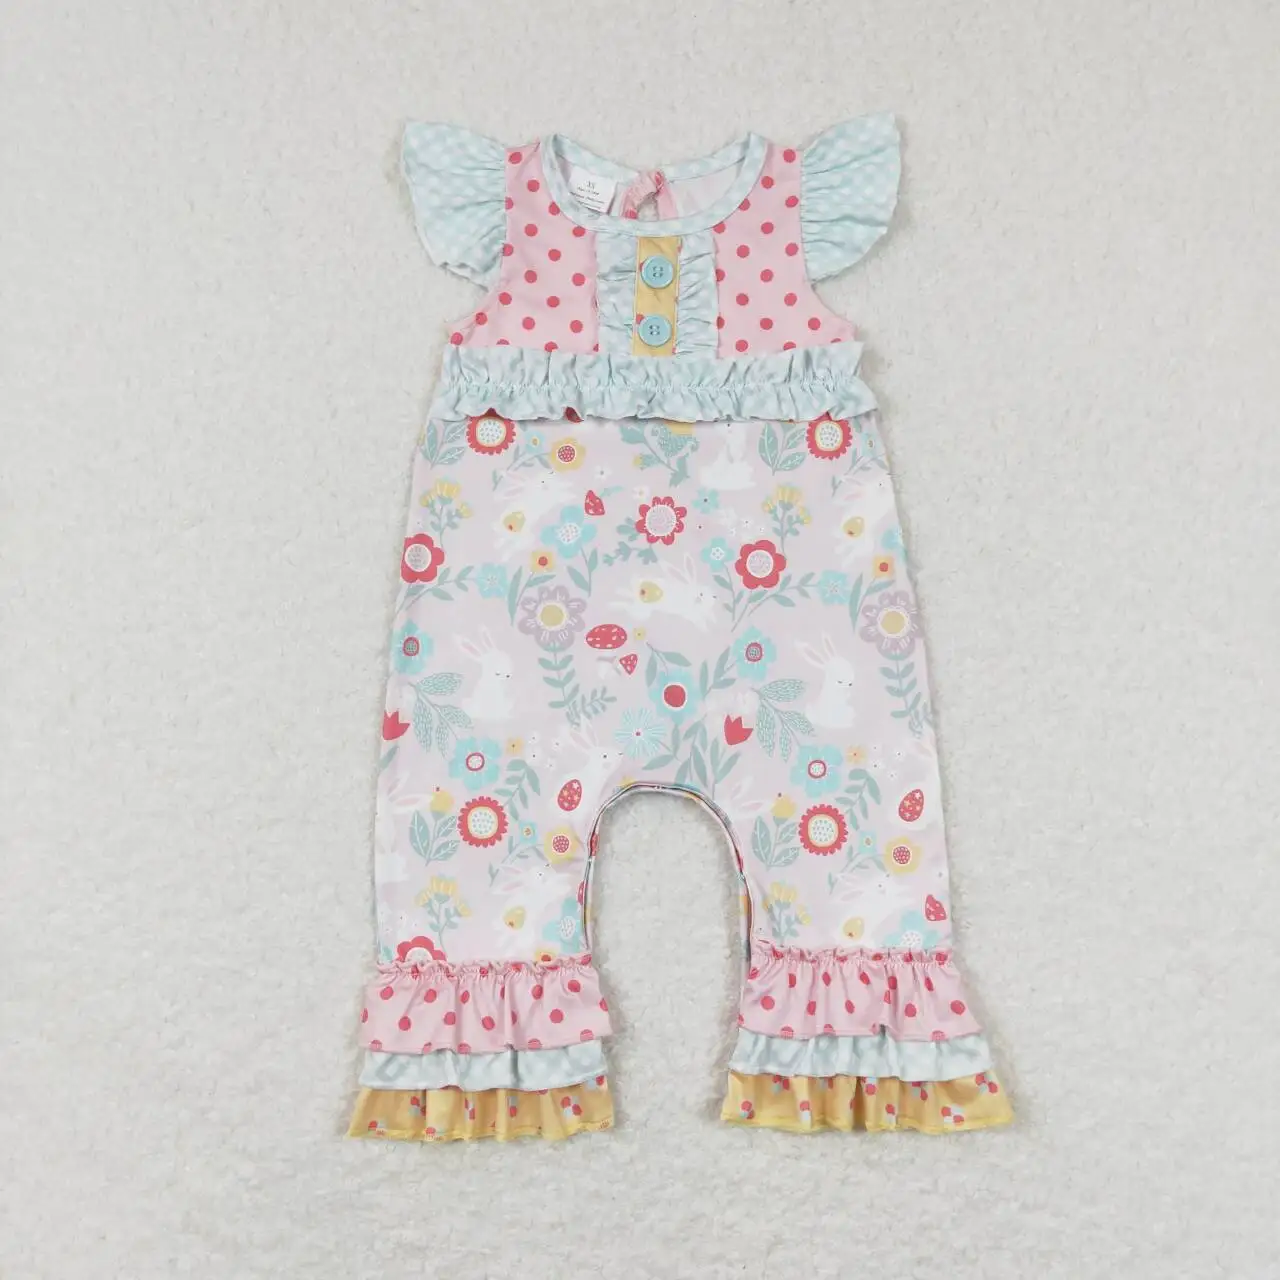 

Wholesale hot sale baby kids clothes newborn toddler Floral bunny polka dot yellow lace short-sleeved onesie rompers